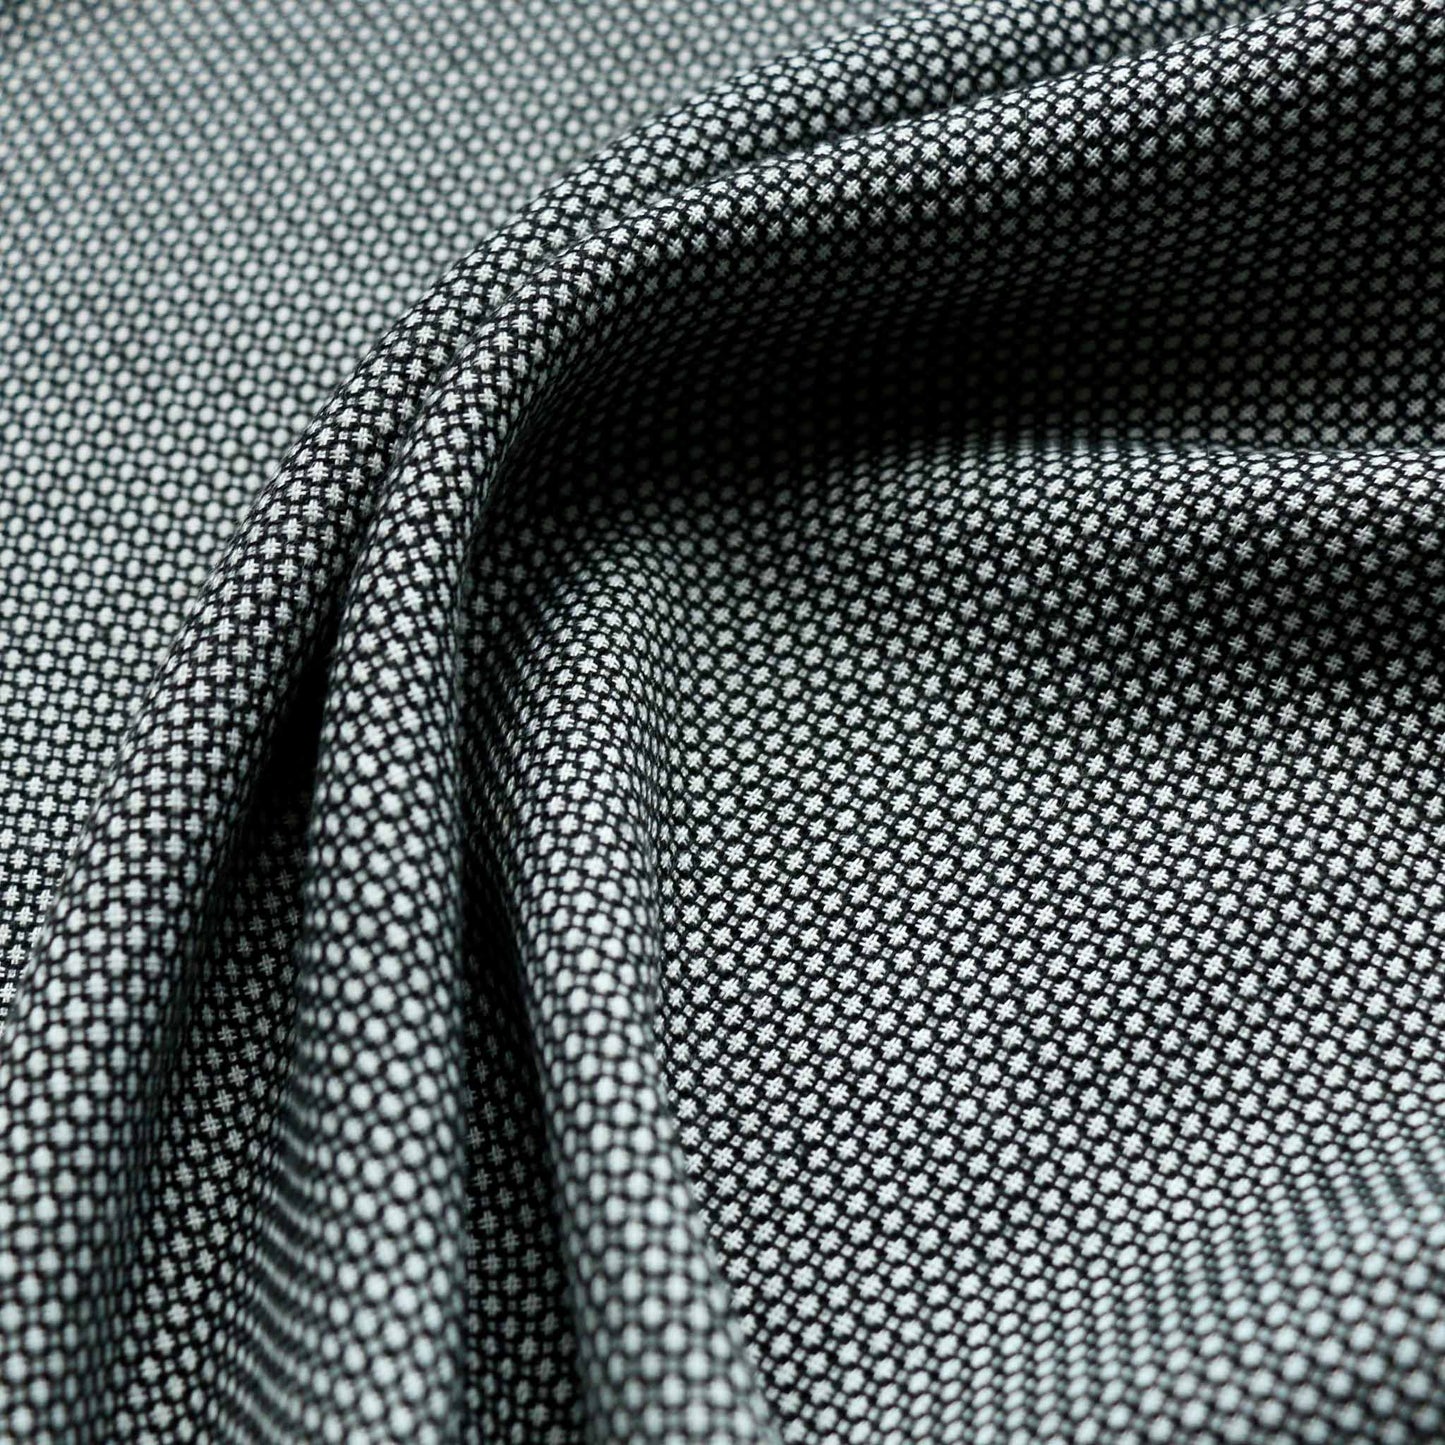 black and white polyviscose suiting dressmaking fabric with jacquard dots design